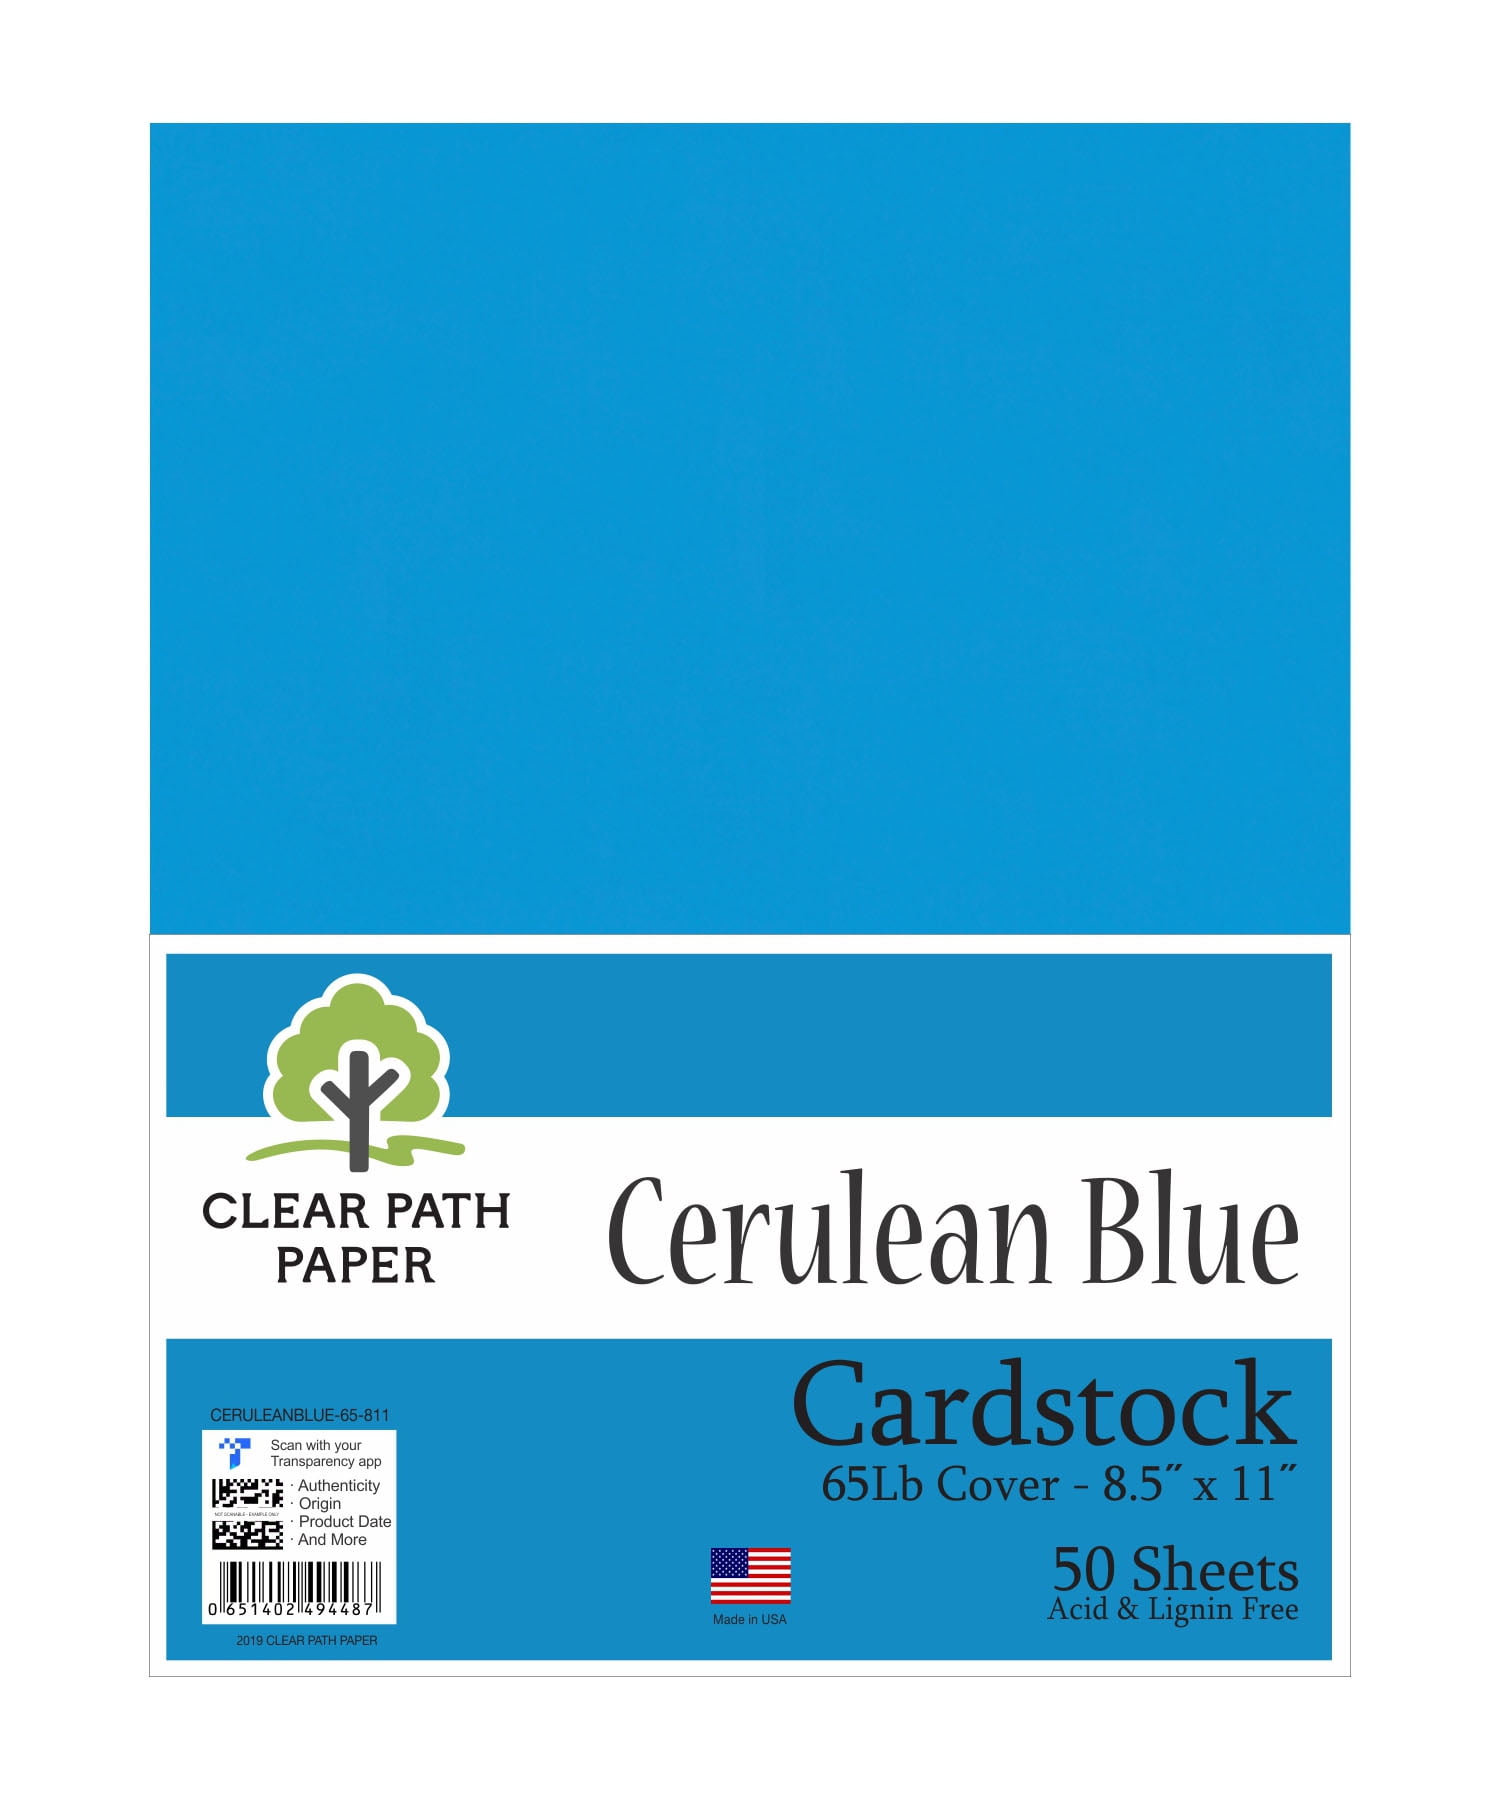 Cerulean Blue Cardstock - 8.5 x 11 inch - 65Lb Cover - 50 Sheets